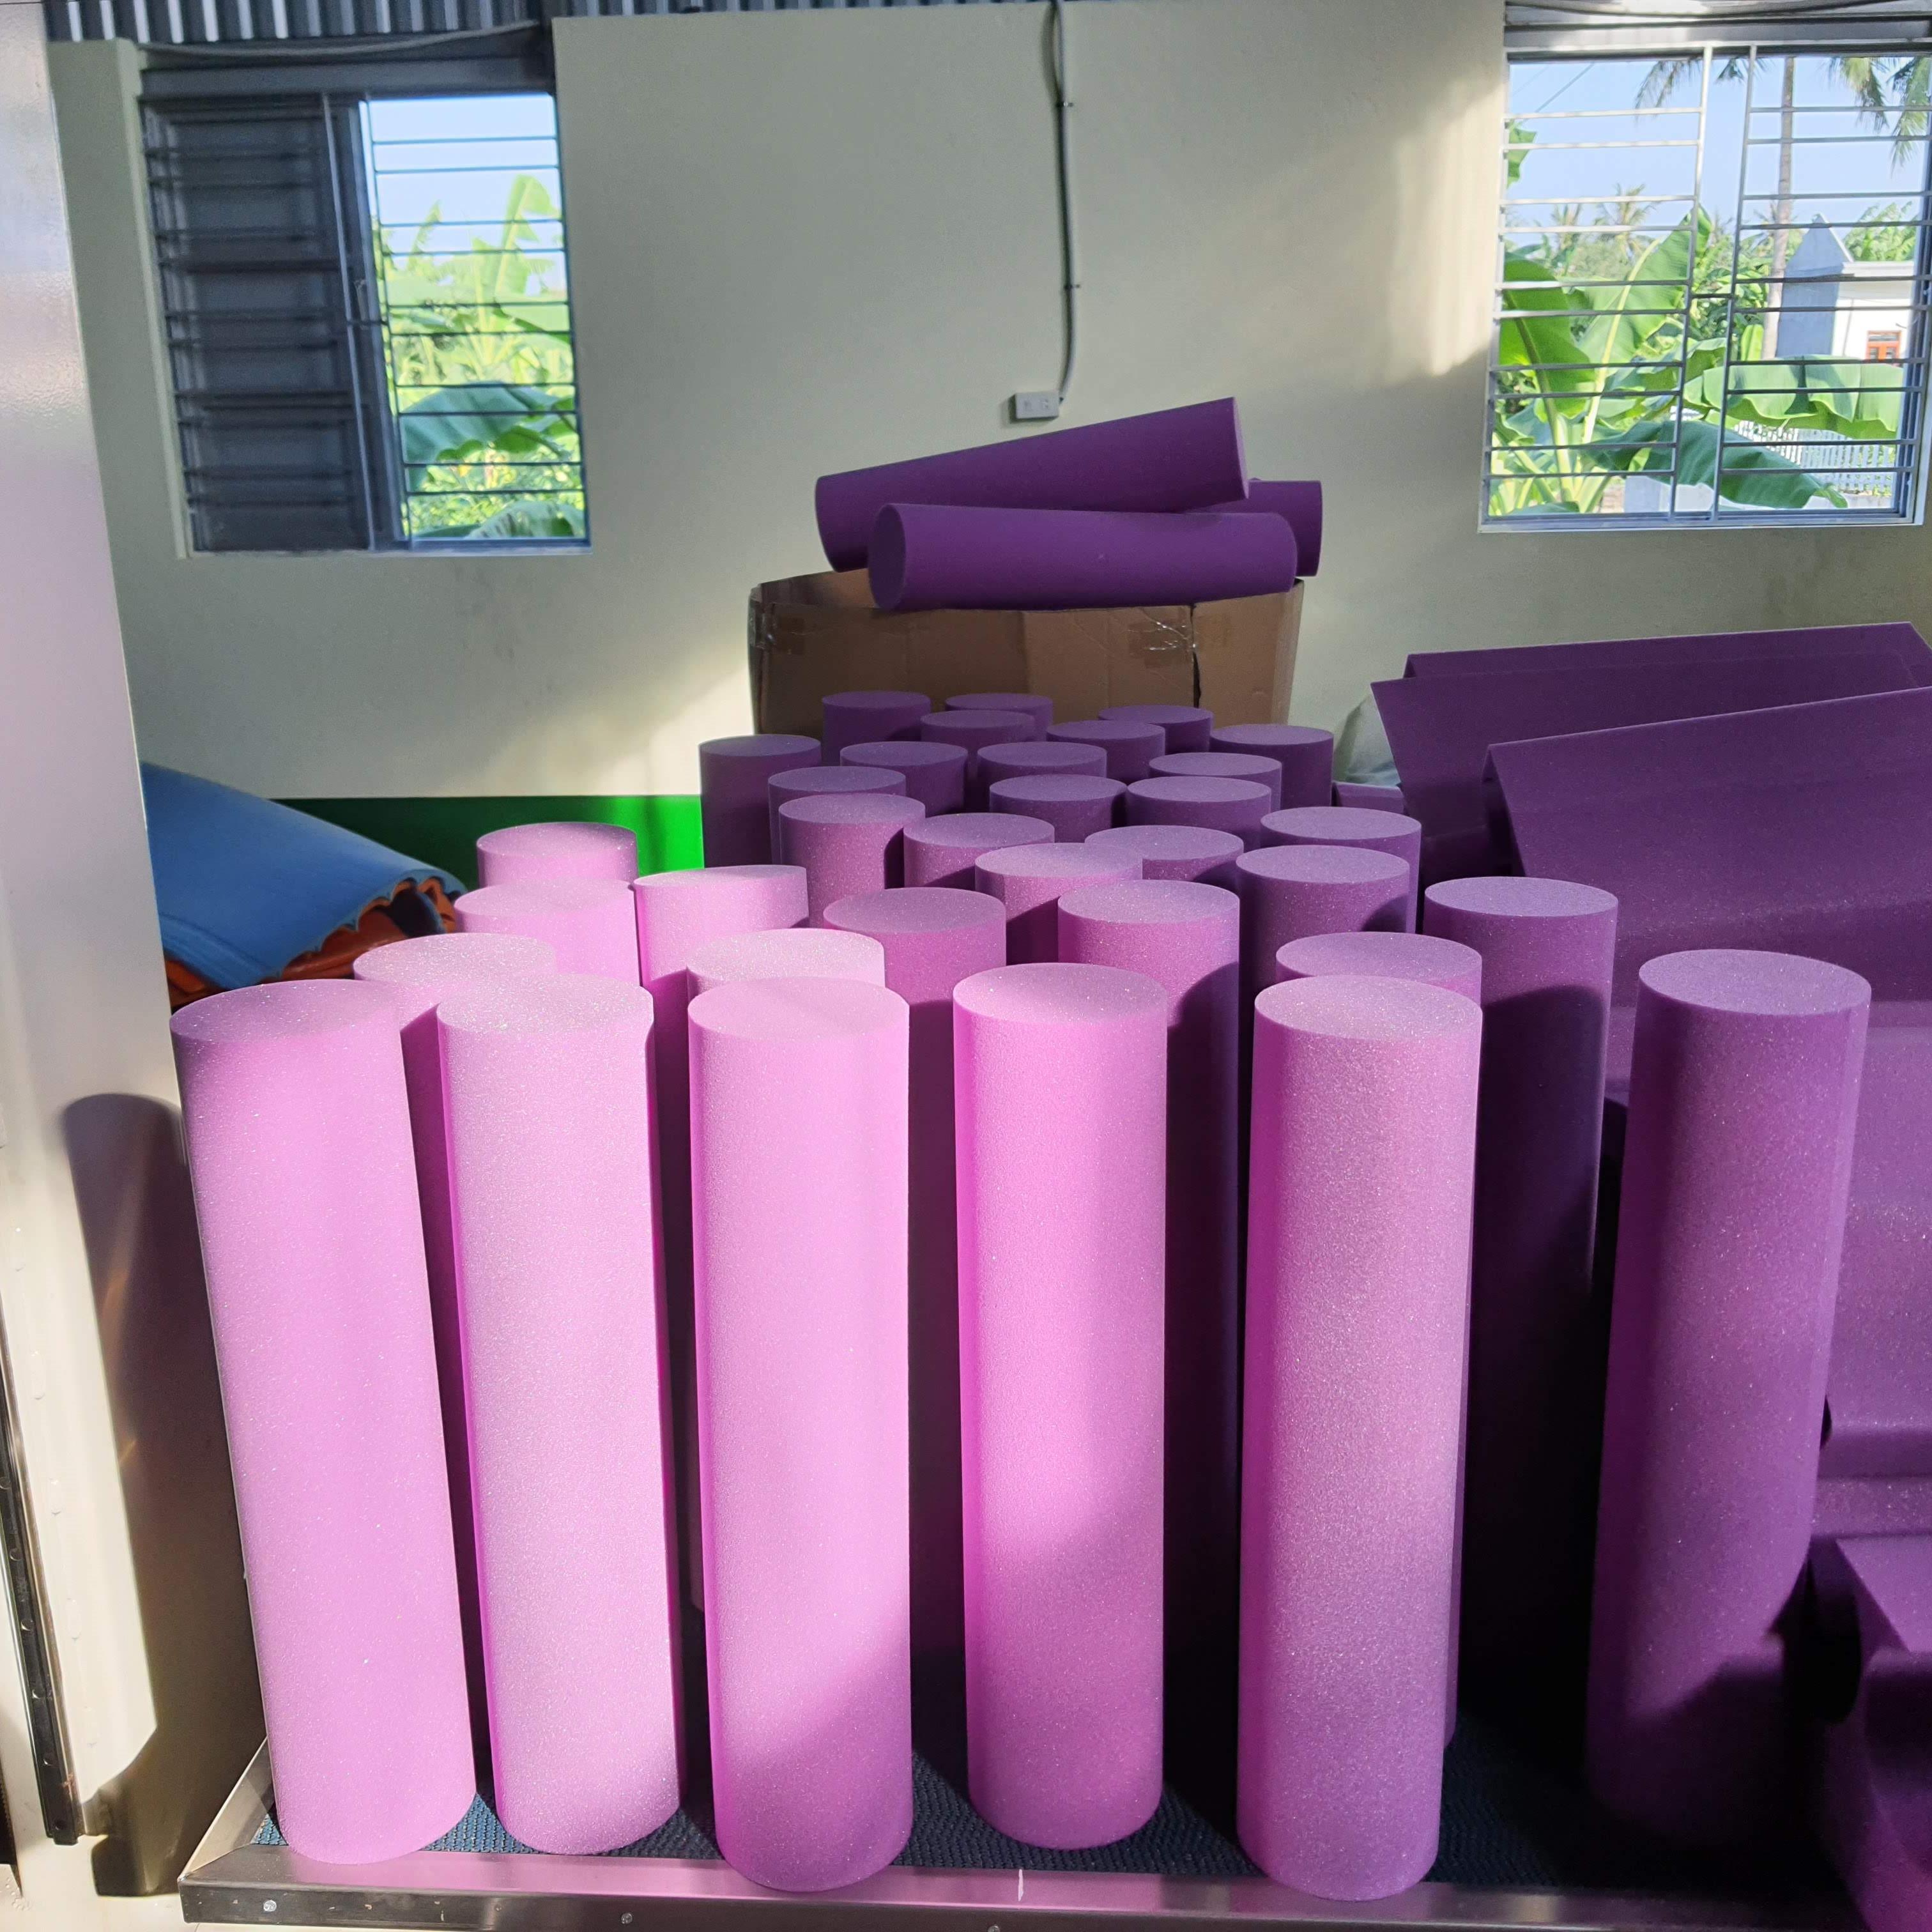 Polyurethane Foam Barrel Good price High Precision Soft Products Material Bags/Boxes Industry Pallets from Vietnam Manufacturer 3